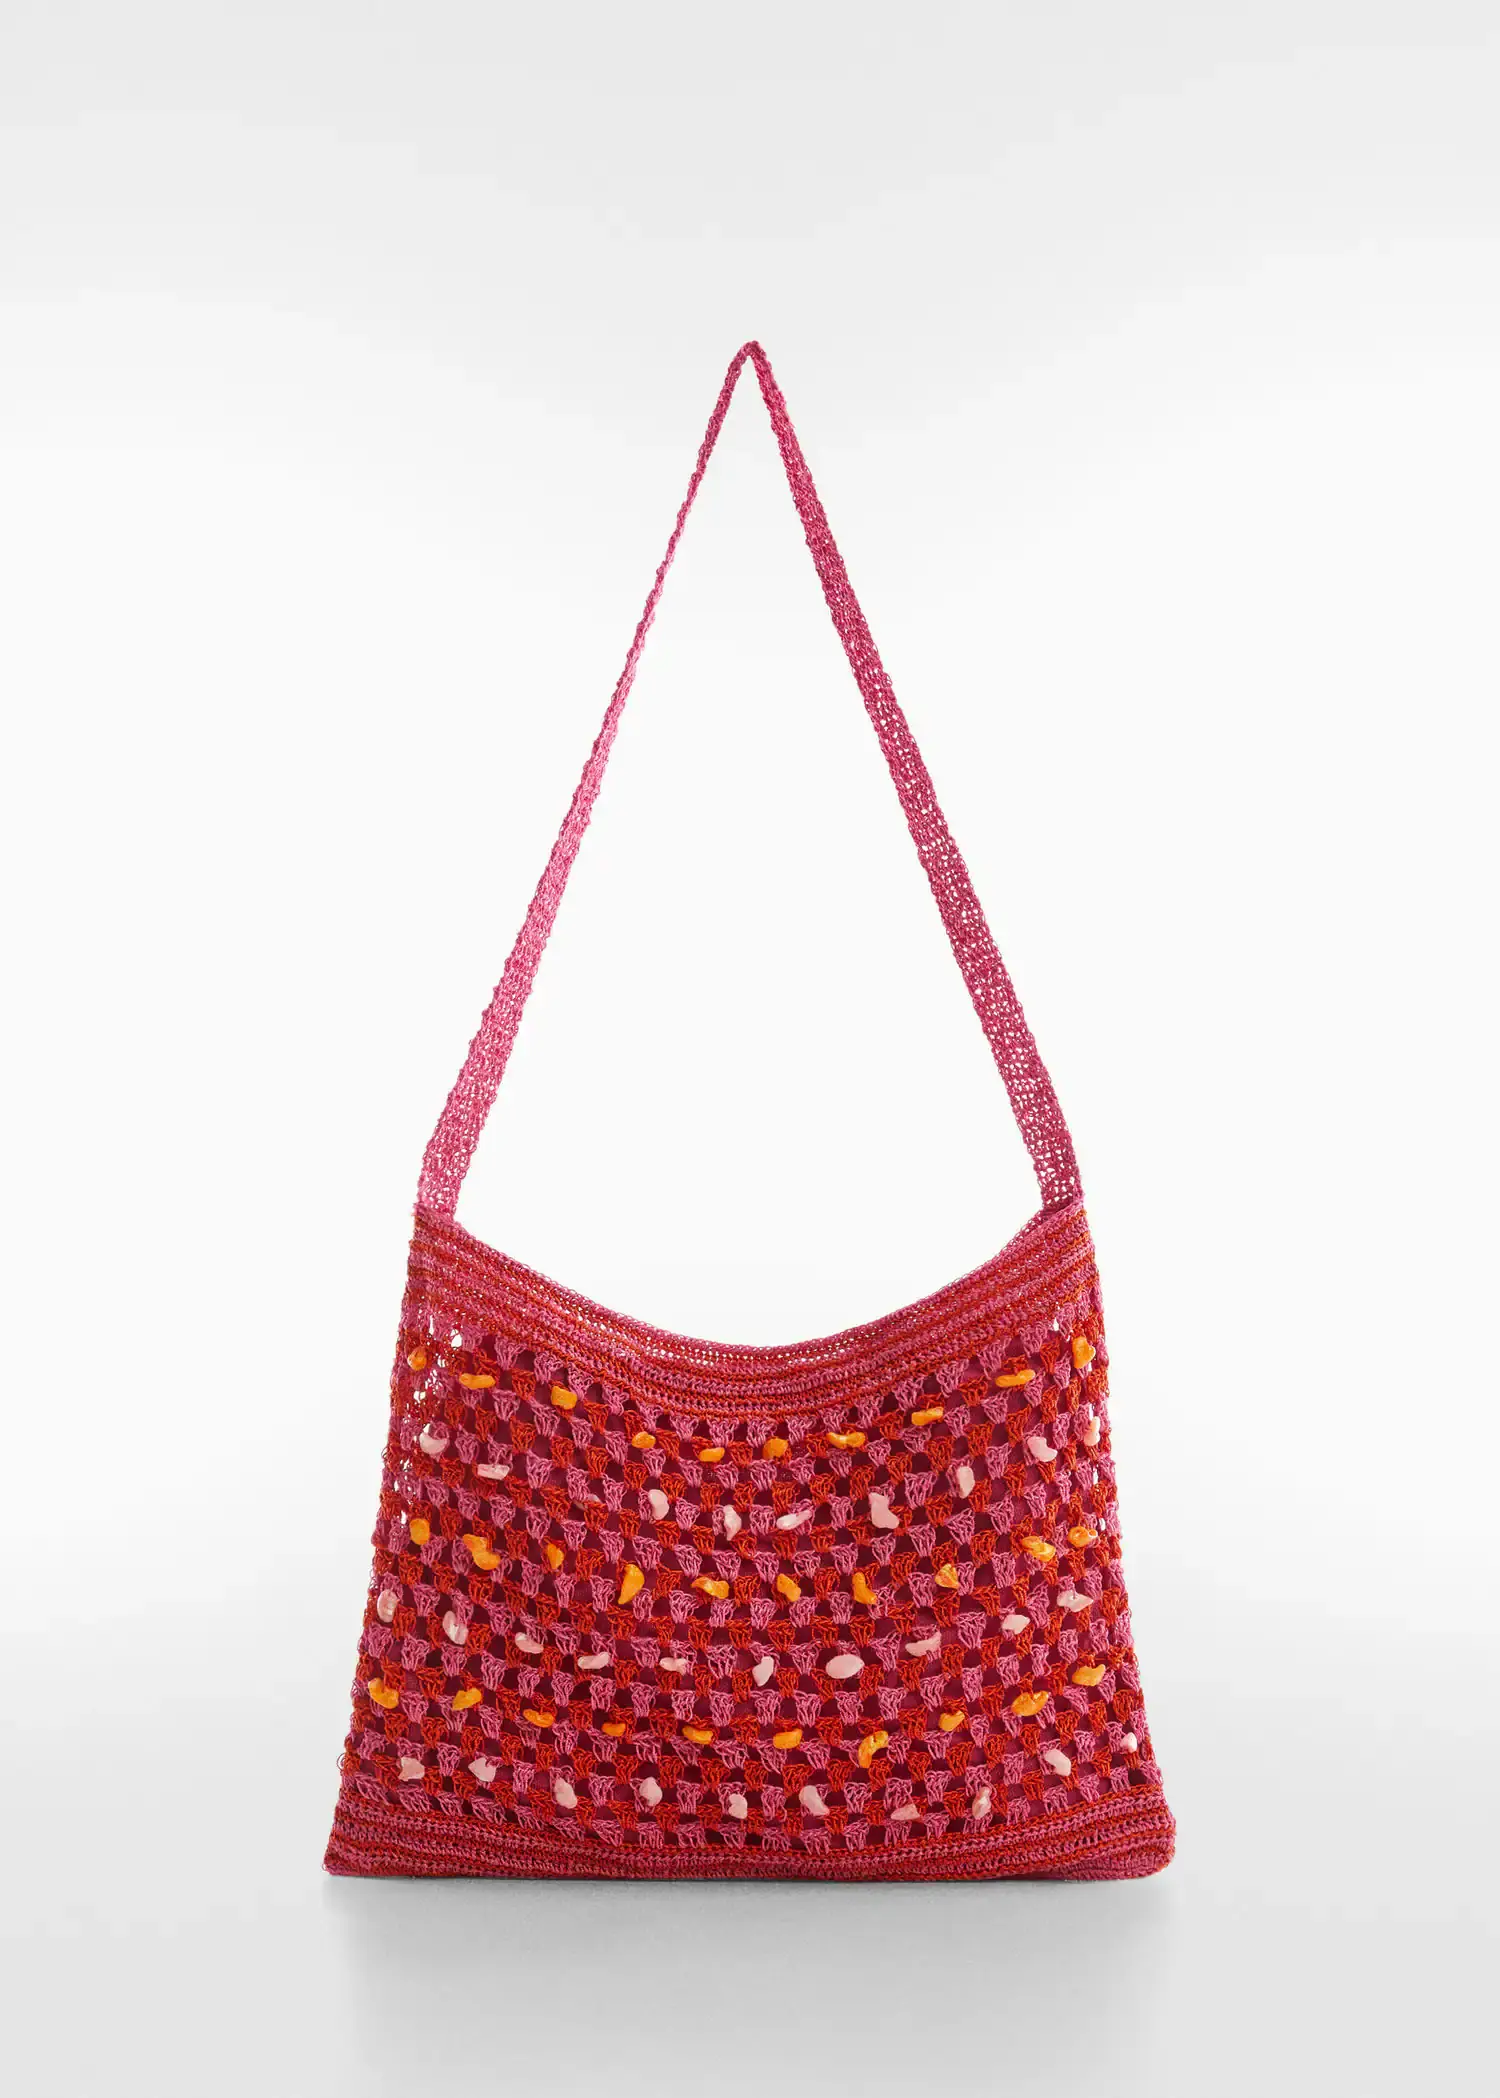 Mango Crochet bag with shell detail. a red purse with a yellow and red pattern. 